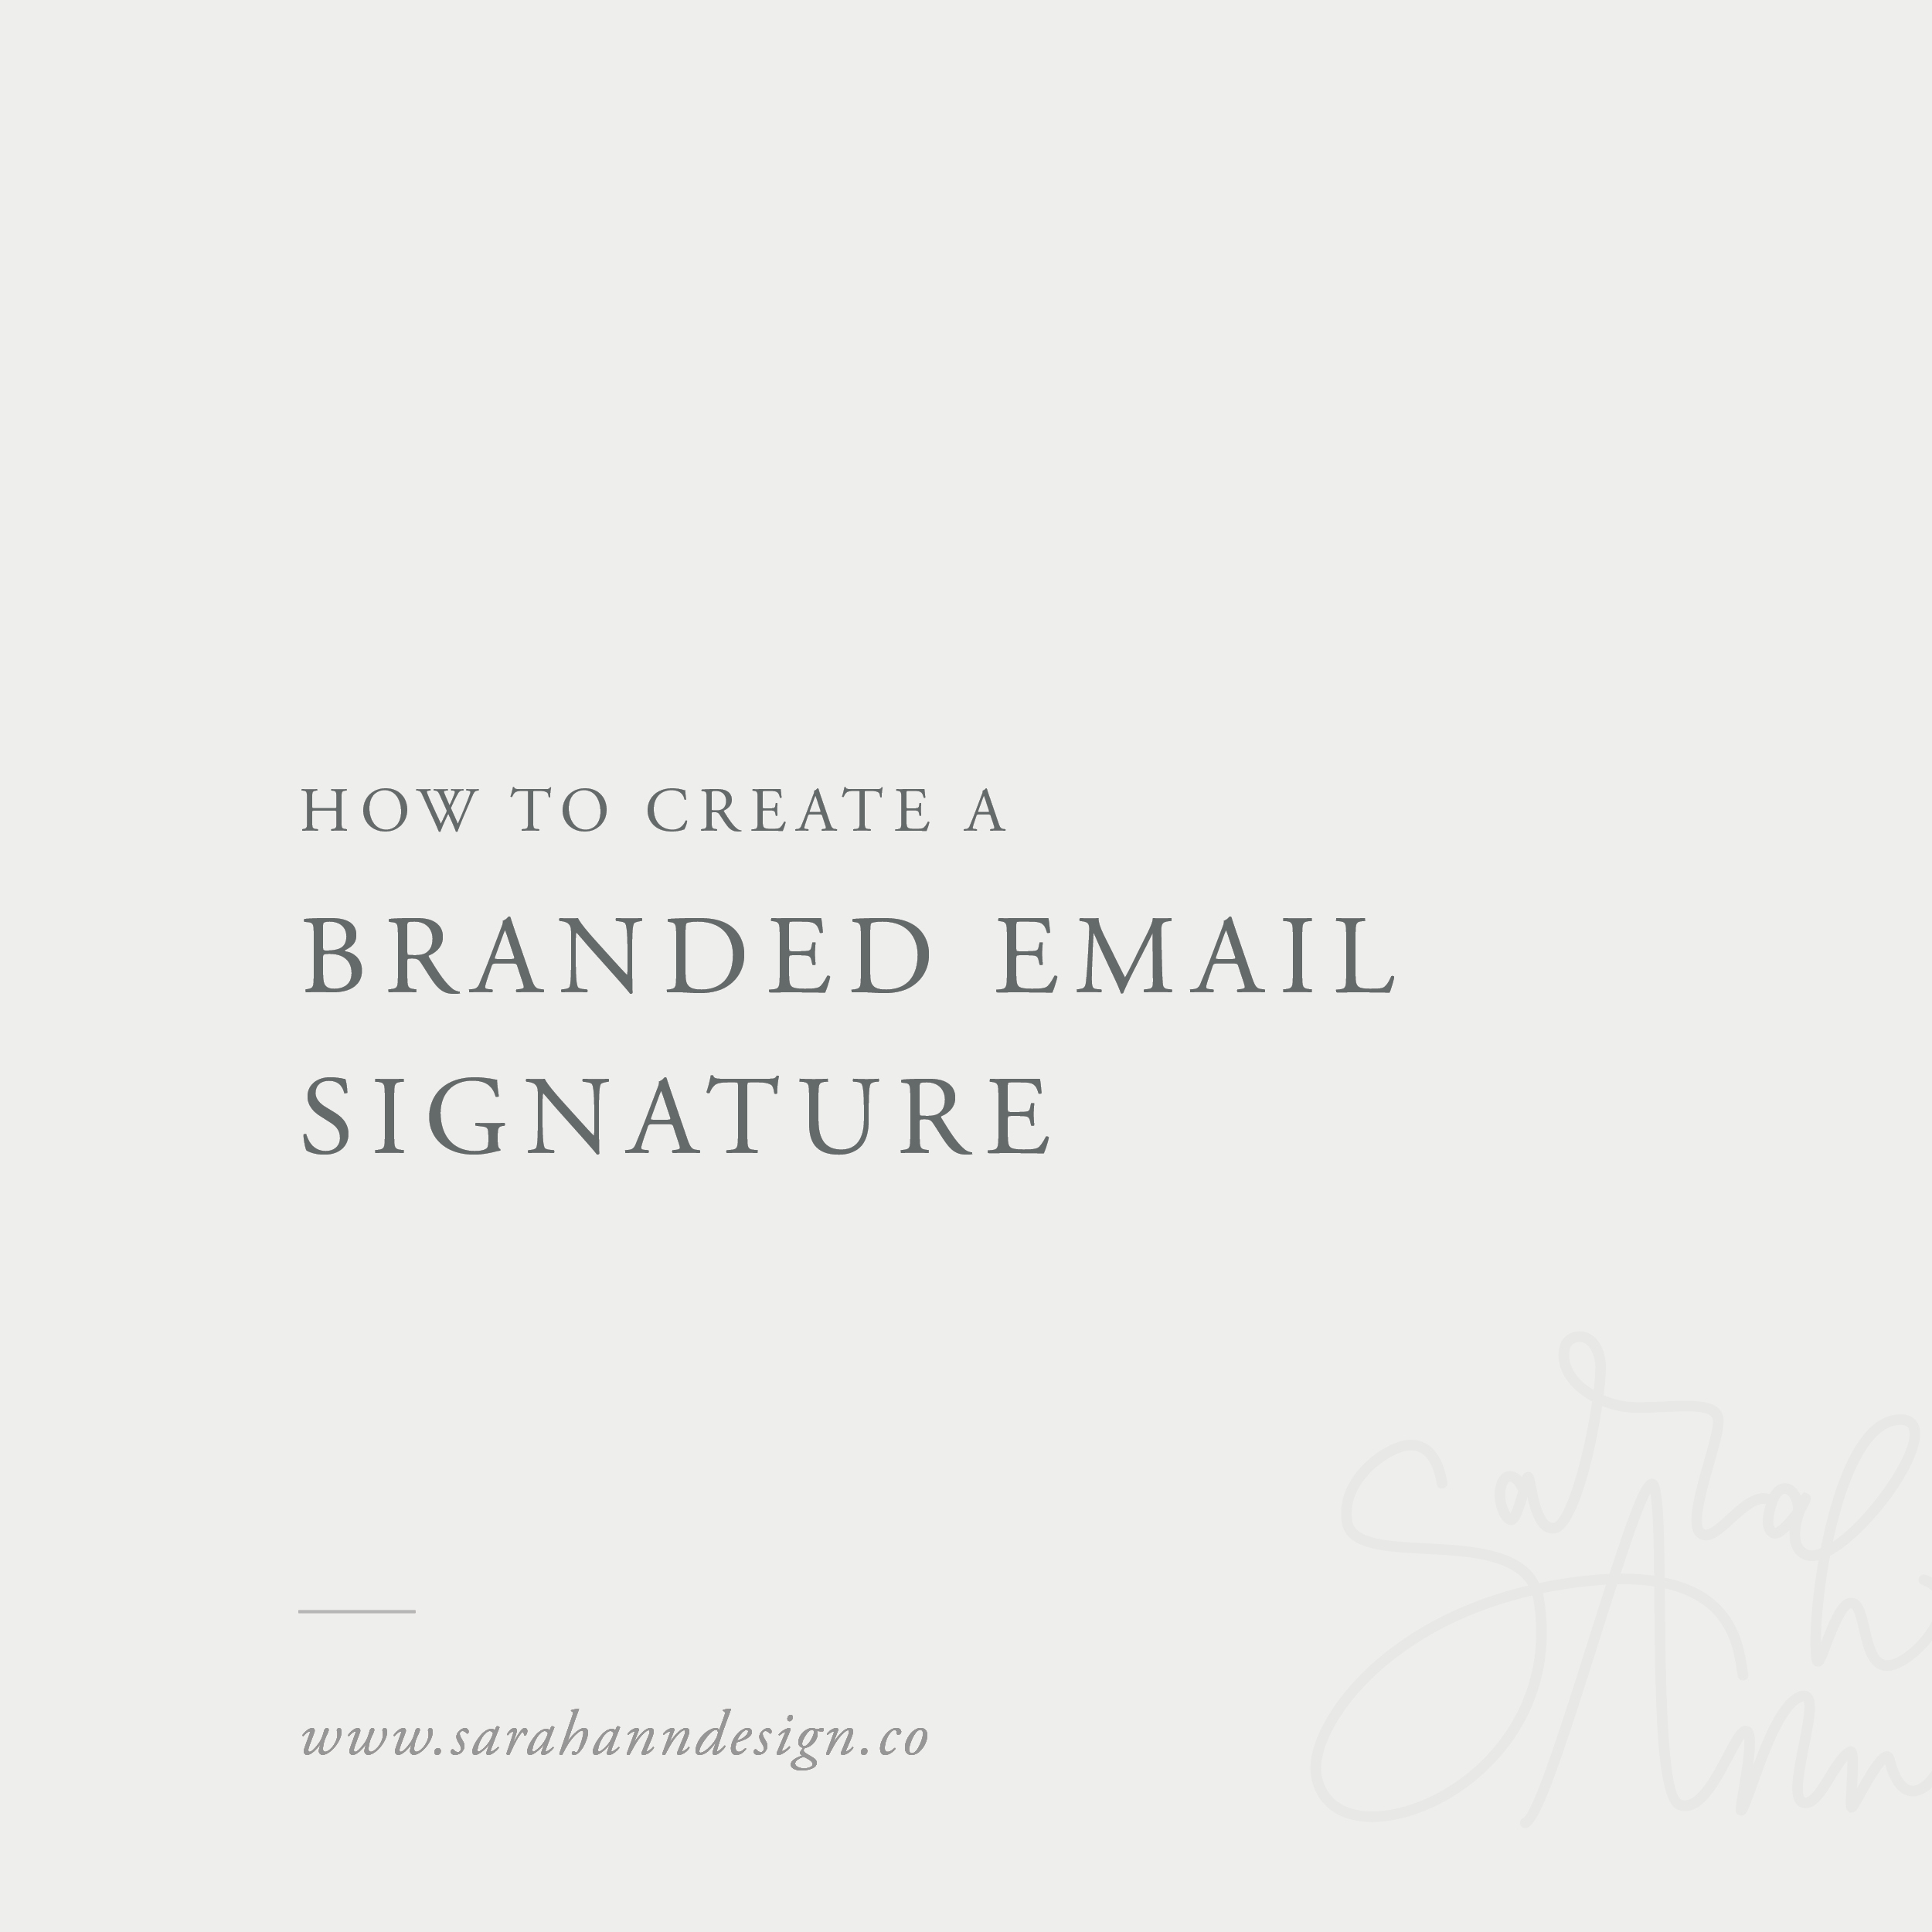 How to Create a Custom Email Signature for Your Brand - Sarah Ann Design